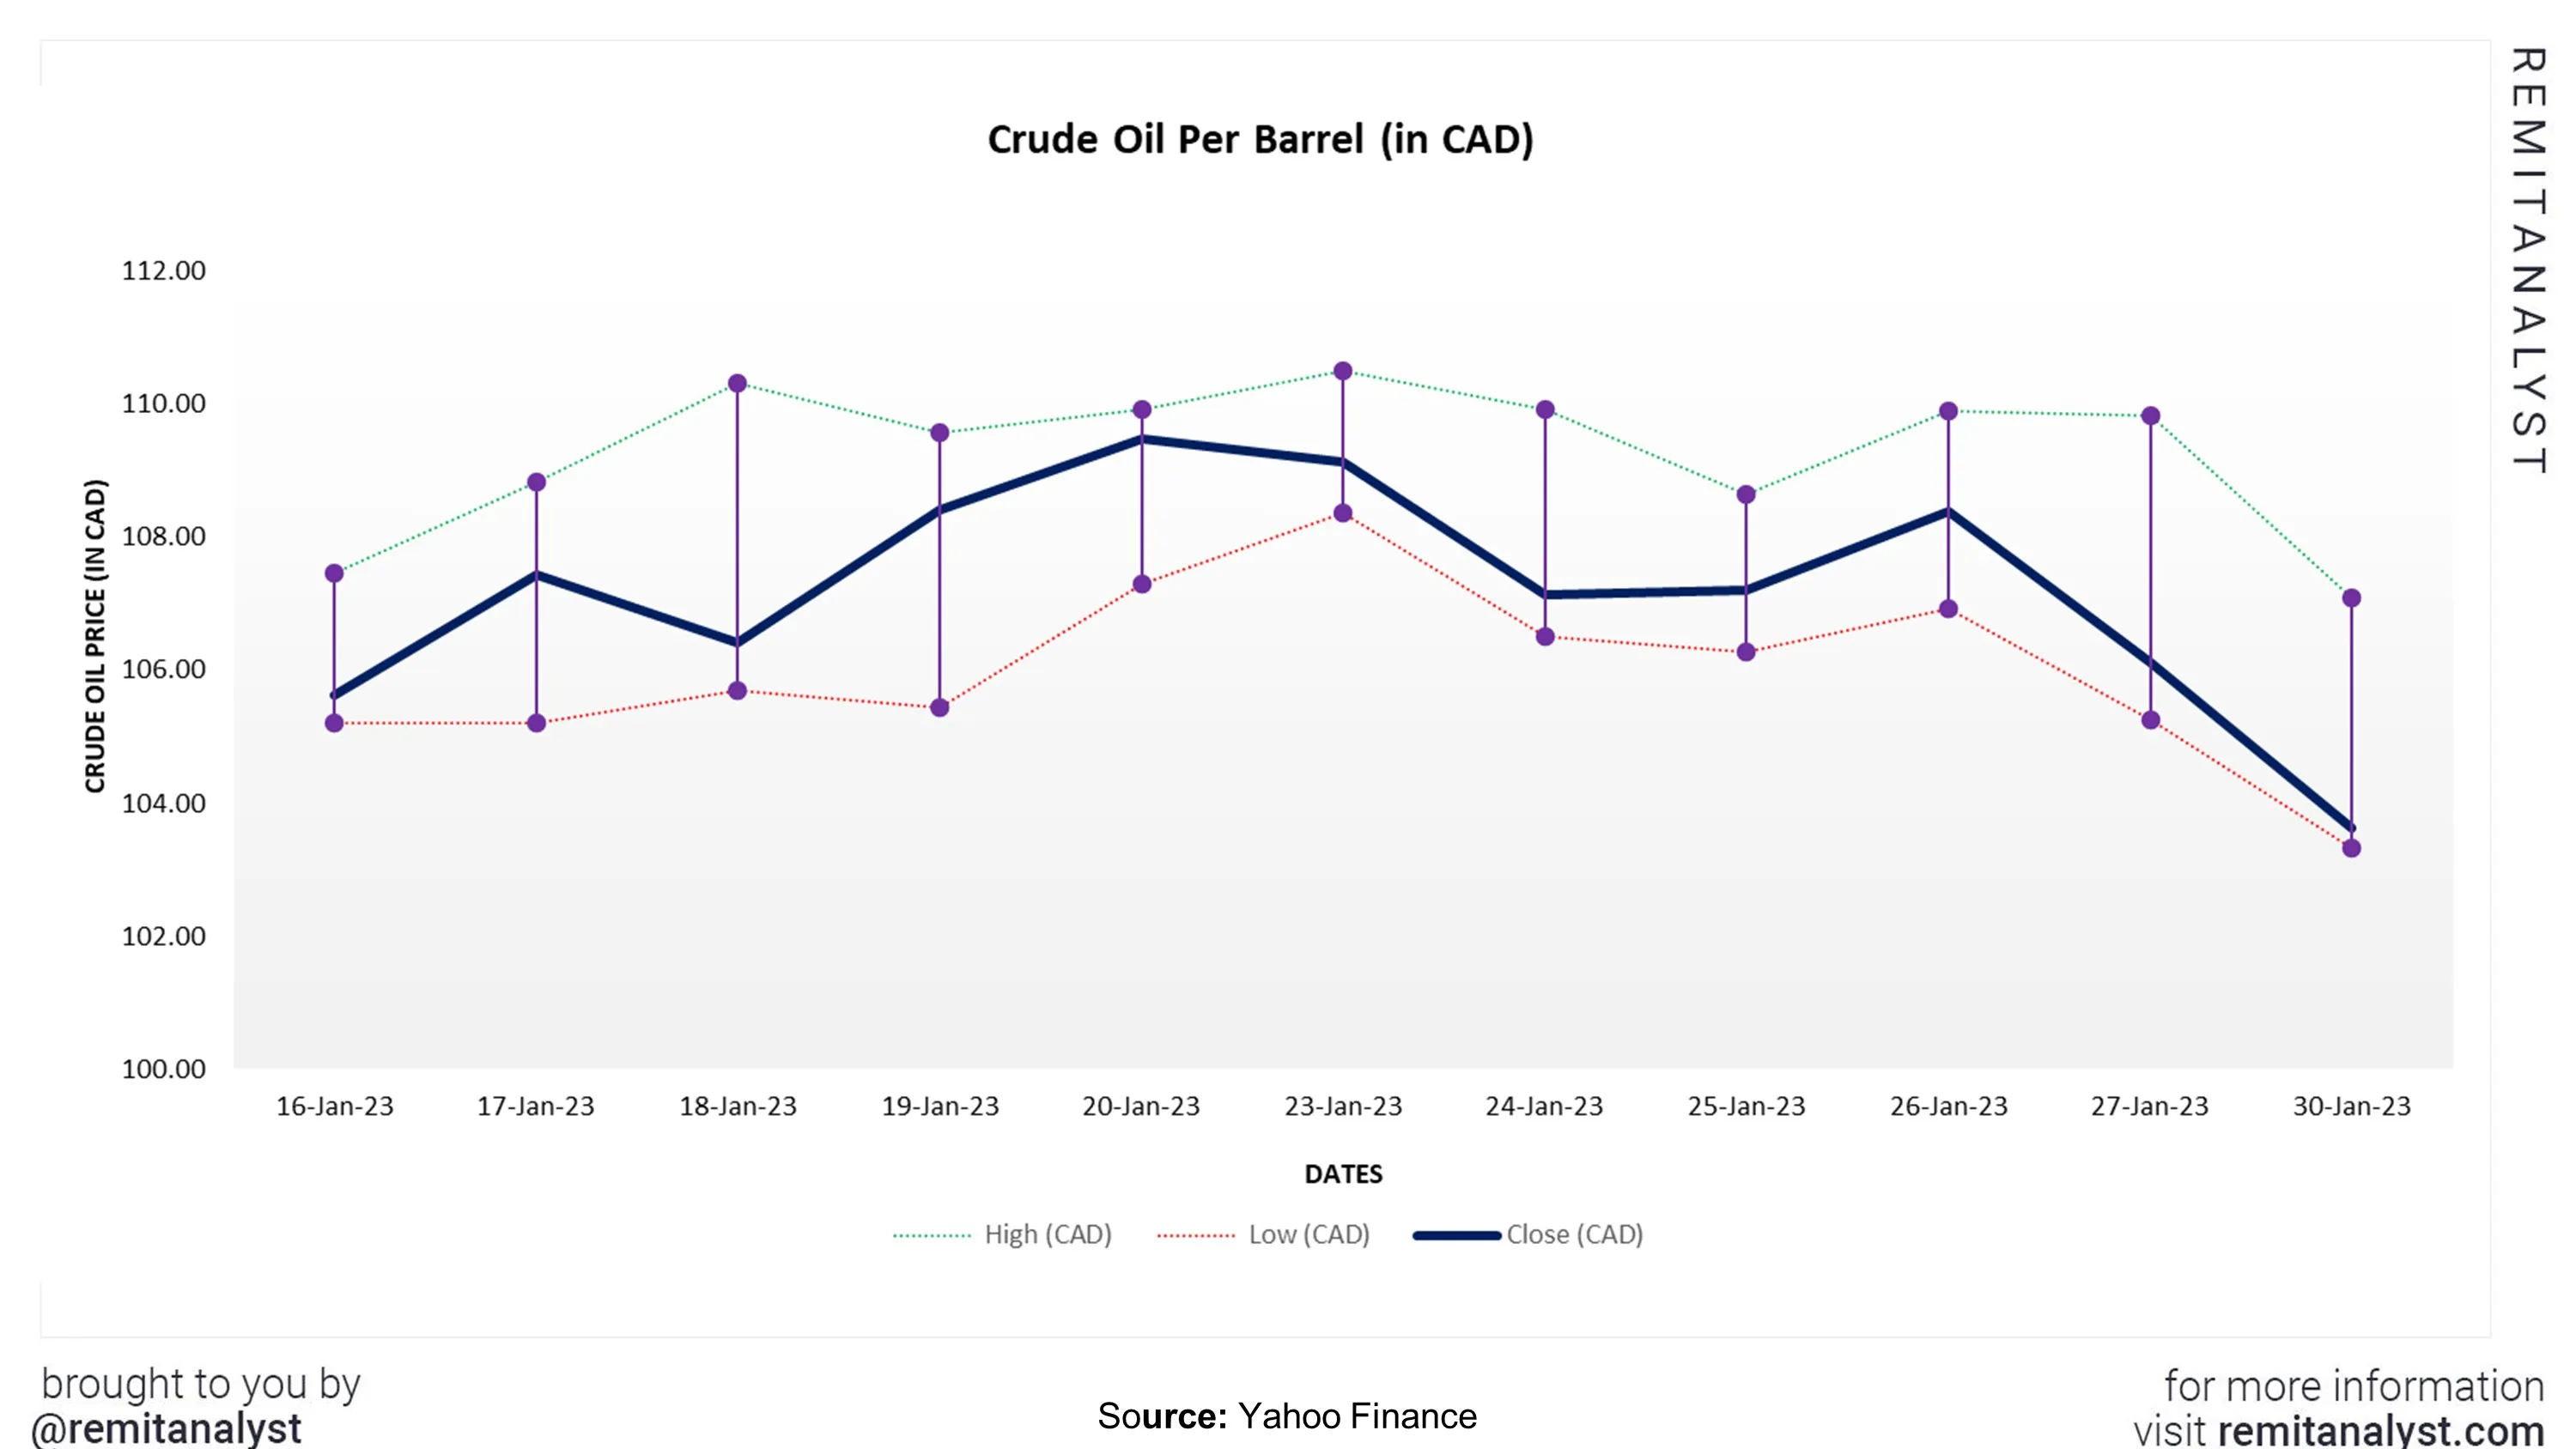 crude-oil-prices-canada-from-16-jan-2023-to-30-jan-2023